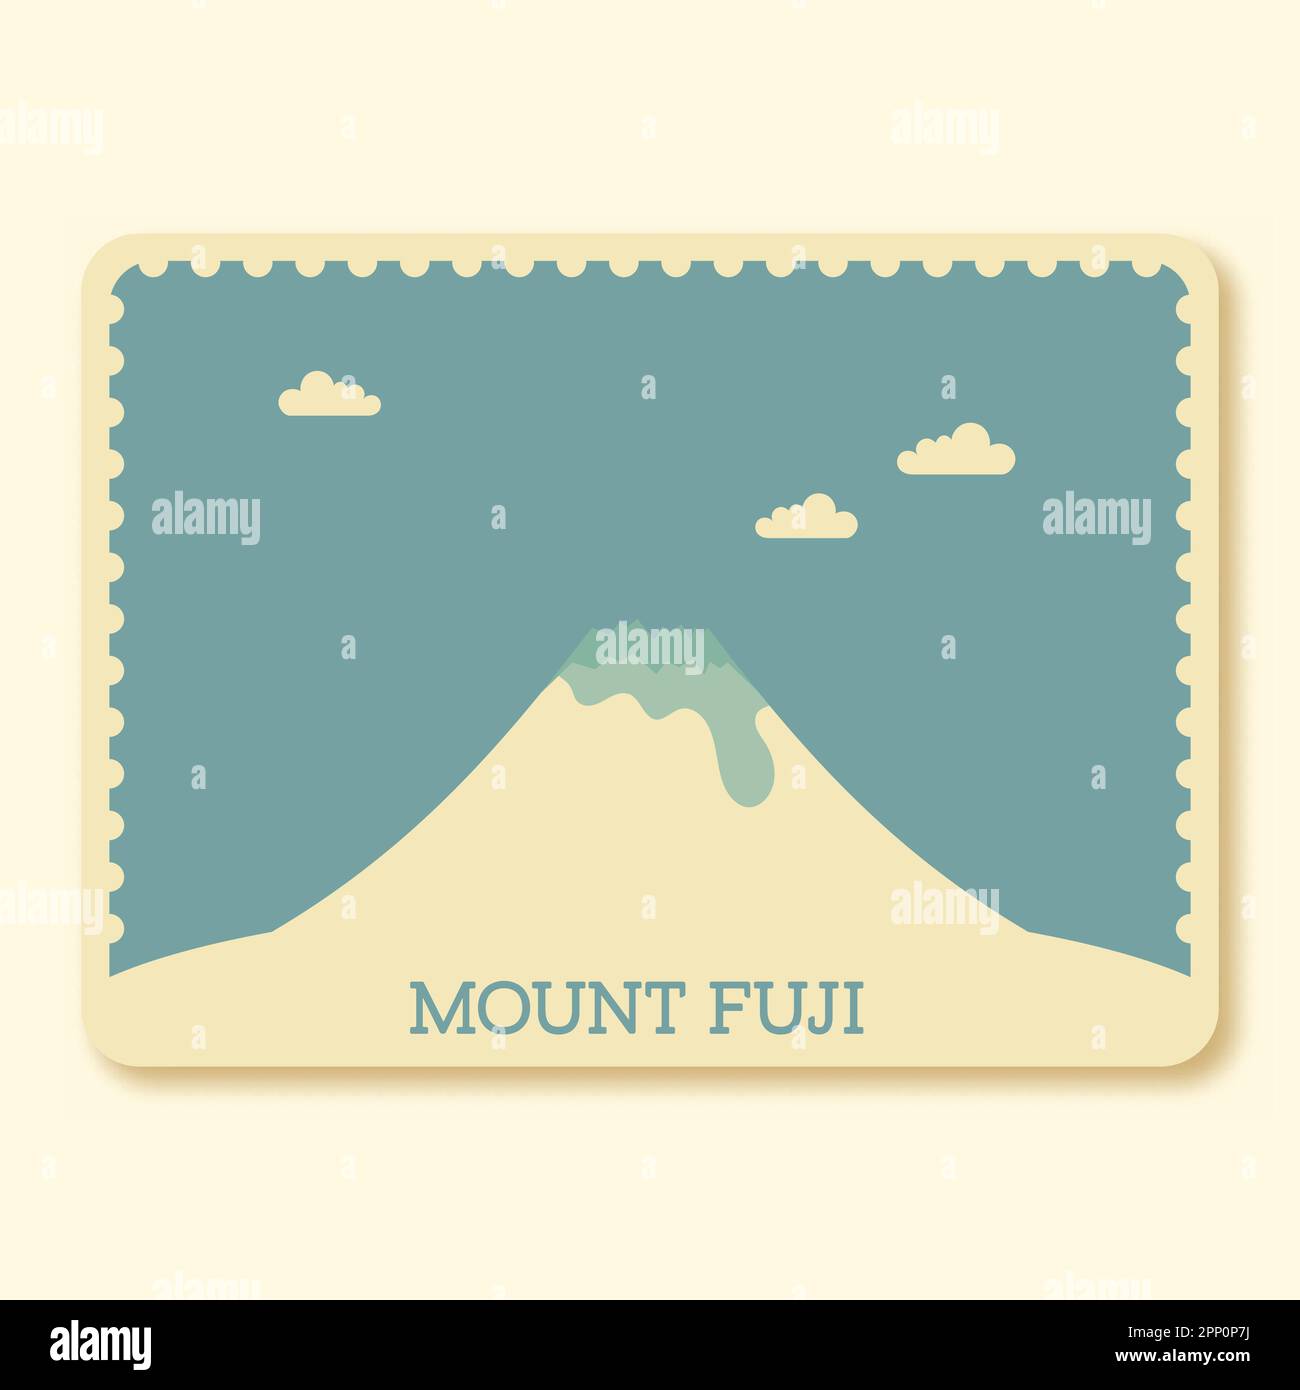 Mount Fuji Stamp Or Poster Design In Blue And Beige Color. Stock Vector